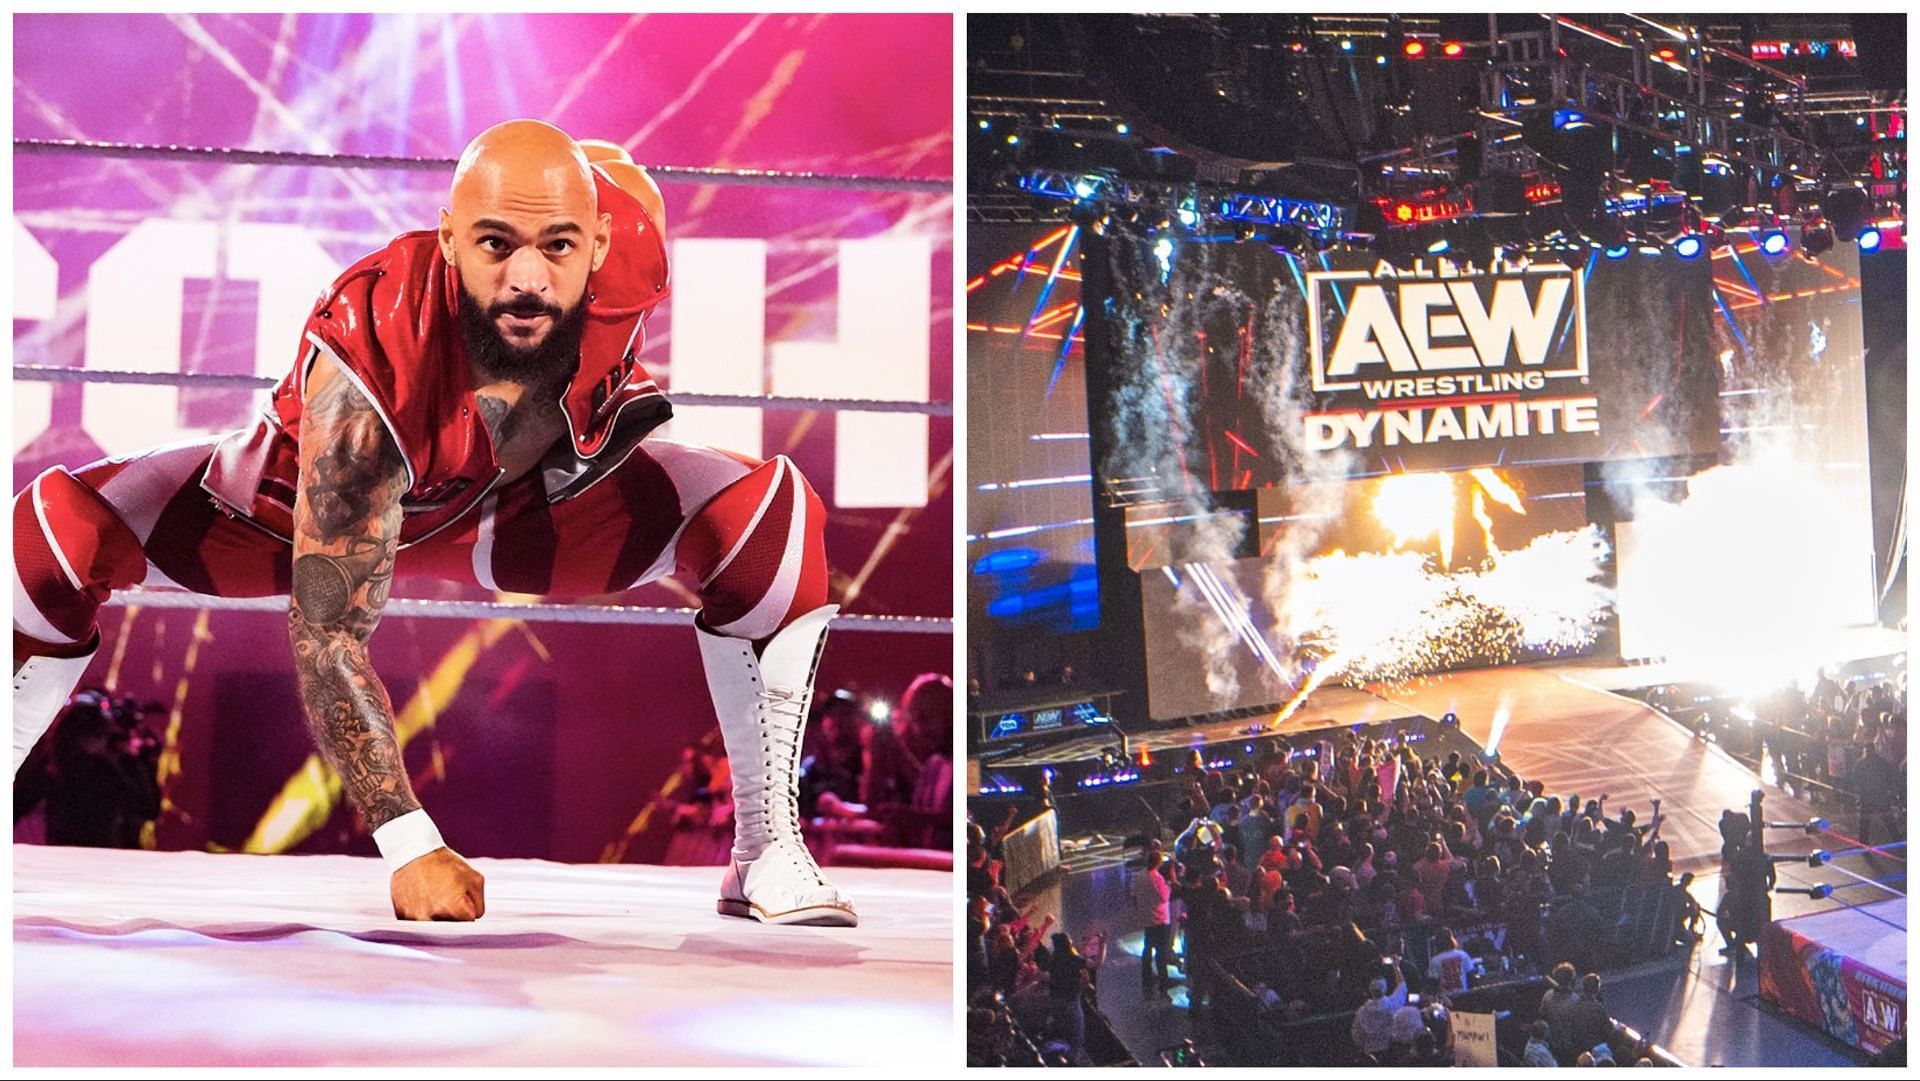 Ricochet stands tall in the WWE ring, fans pack arena for a live AEW Dynamite